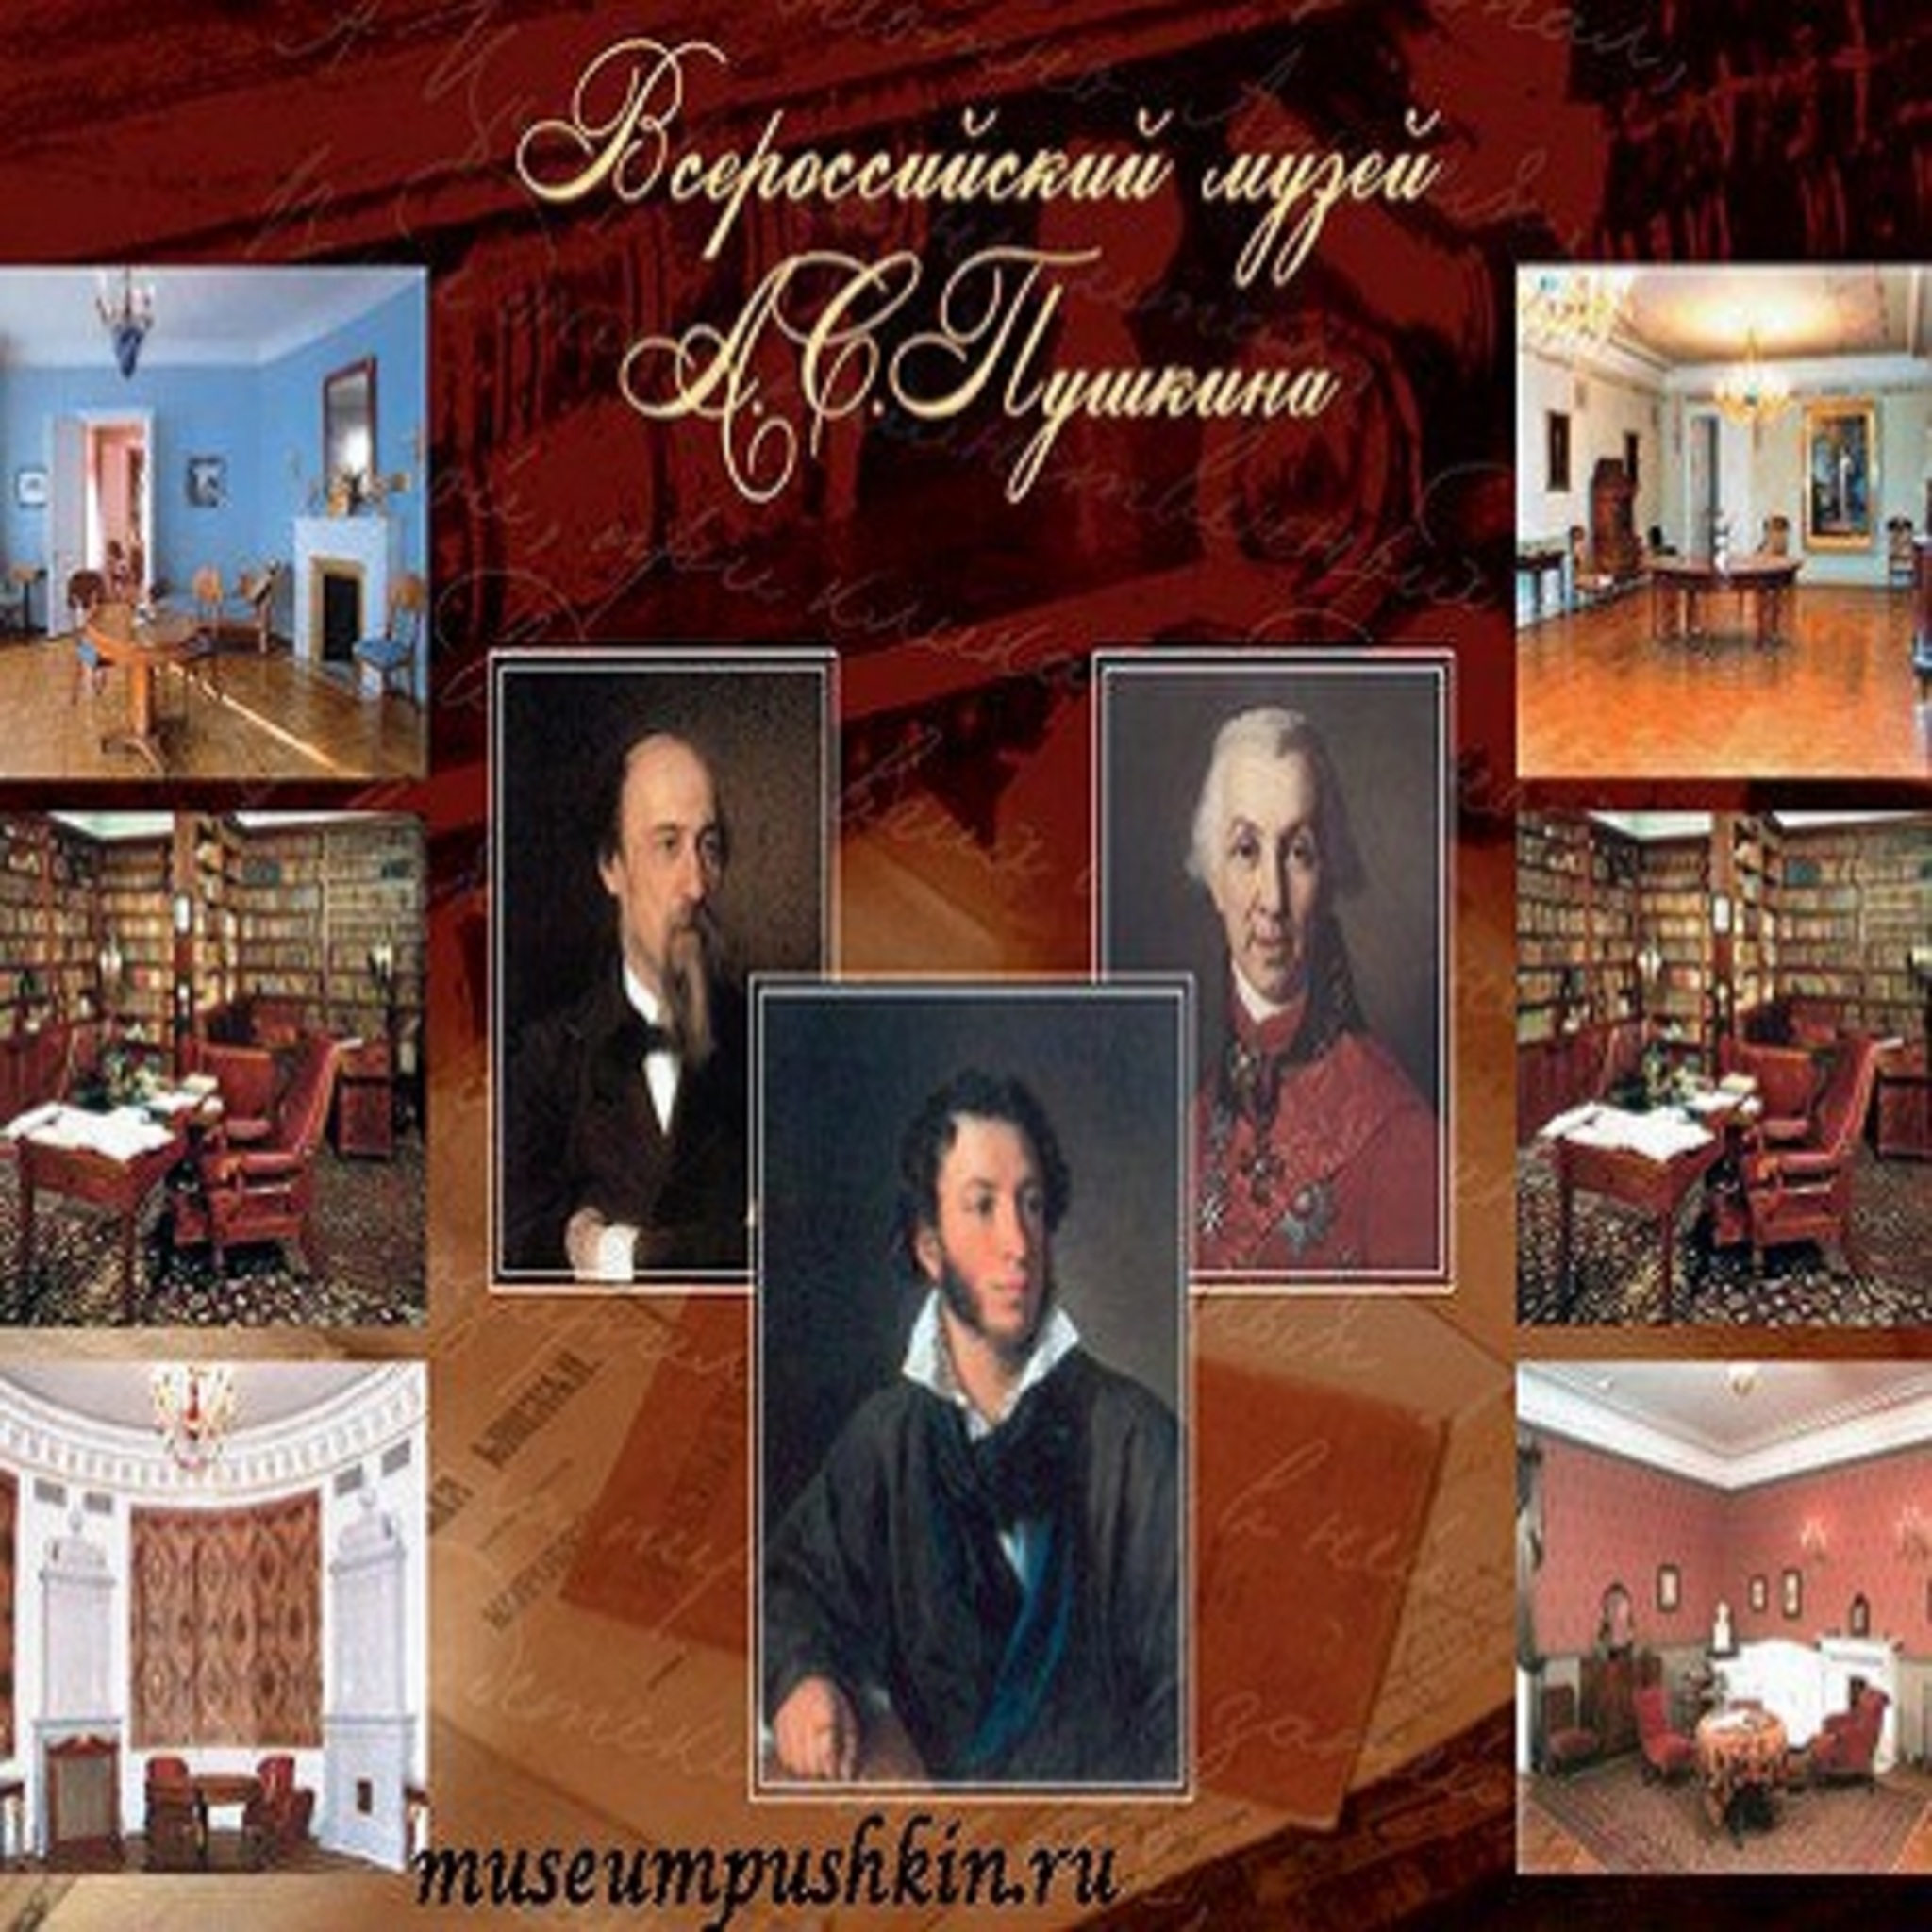 Our events of All-Russian Pushkin Museum on August 2015